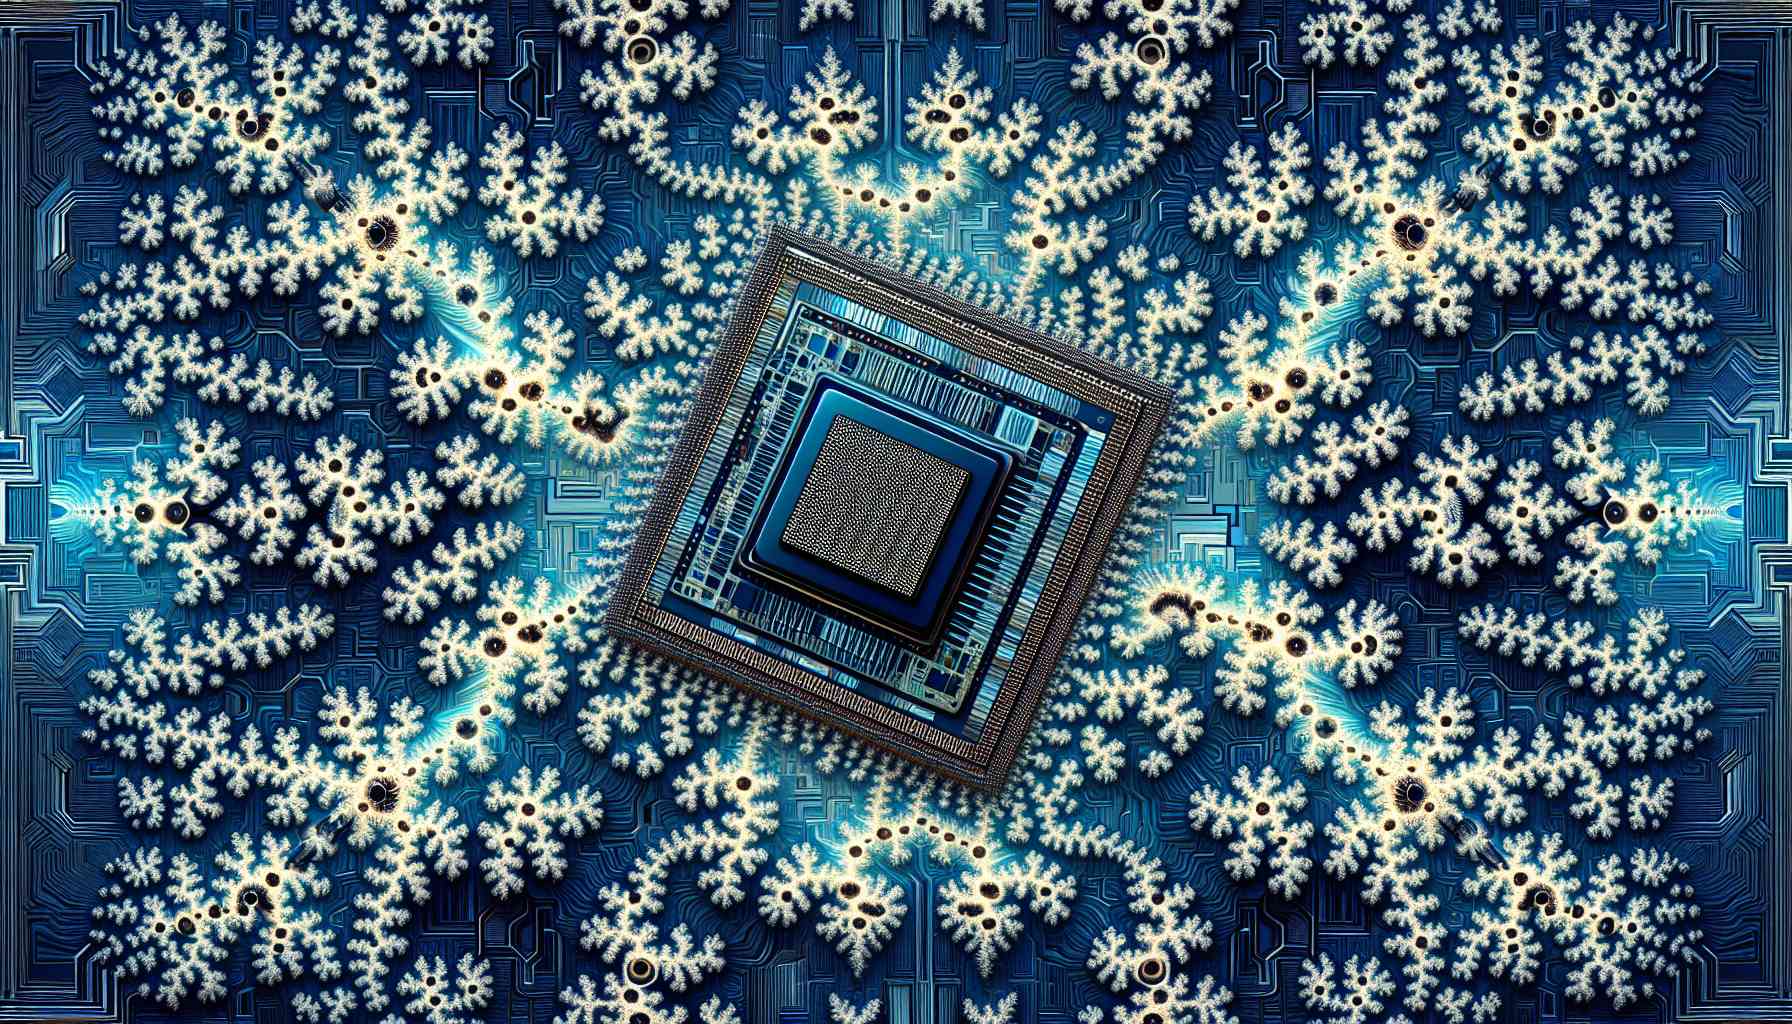 An Unconventional Combination: RISC-V CPU and Mandelbrot Set